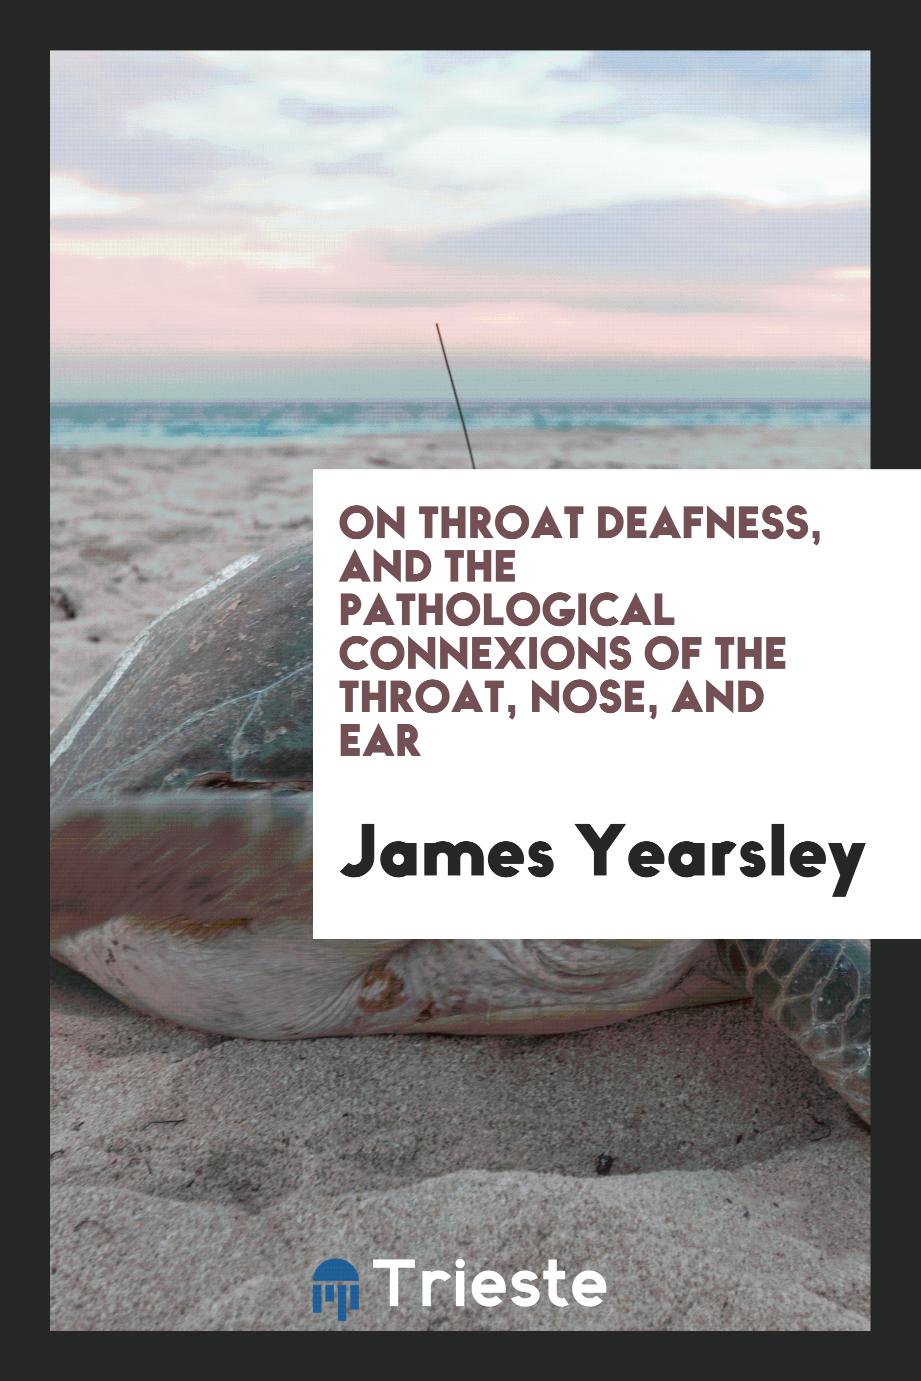 On Throat Deafness, and the Pathological Connexions of the Throat, Nose, and Ear